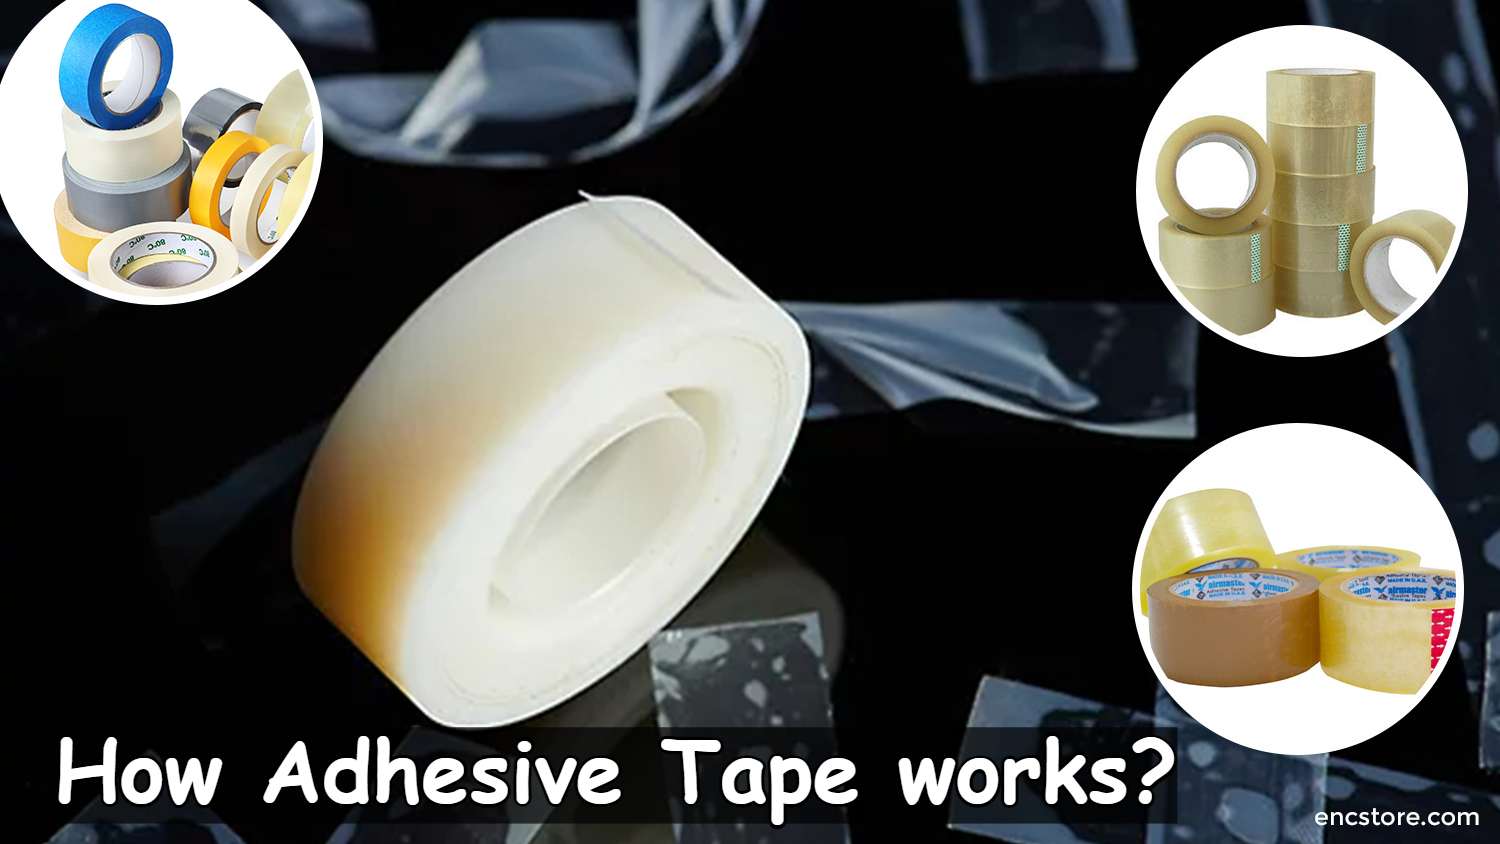 How Adhesive Tape works?